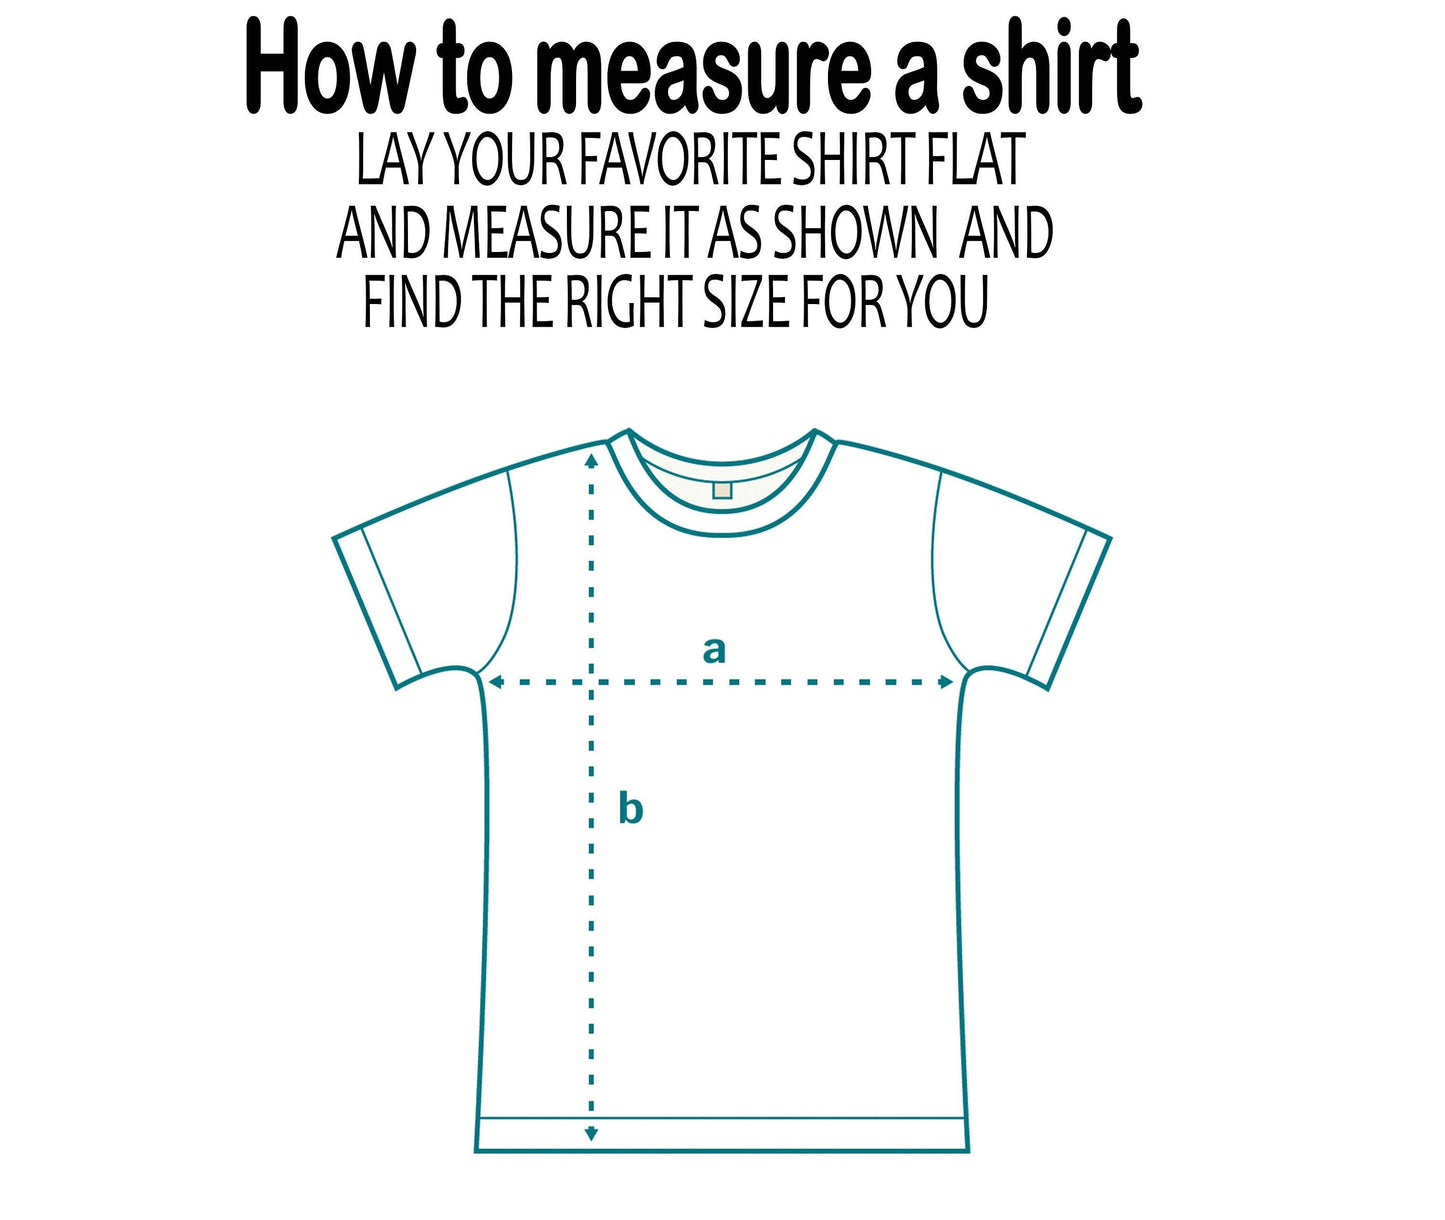 How to measure a shirt